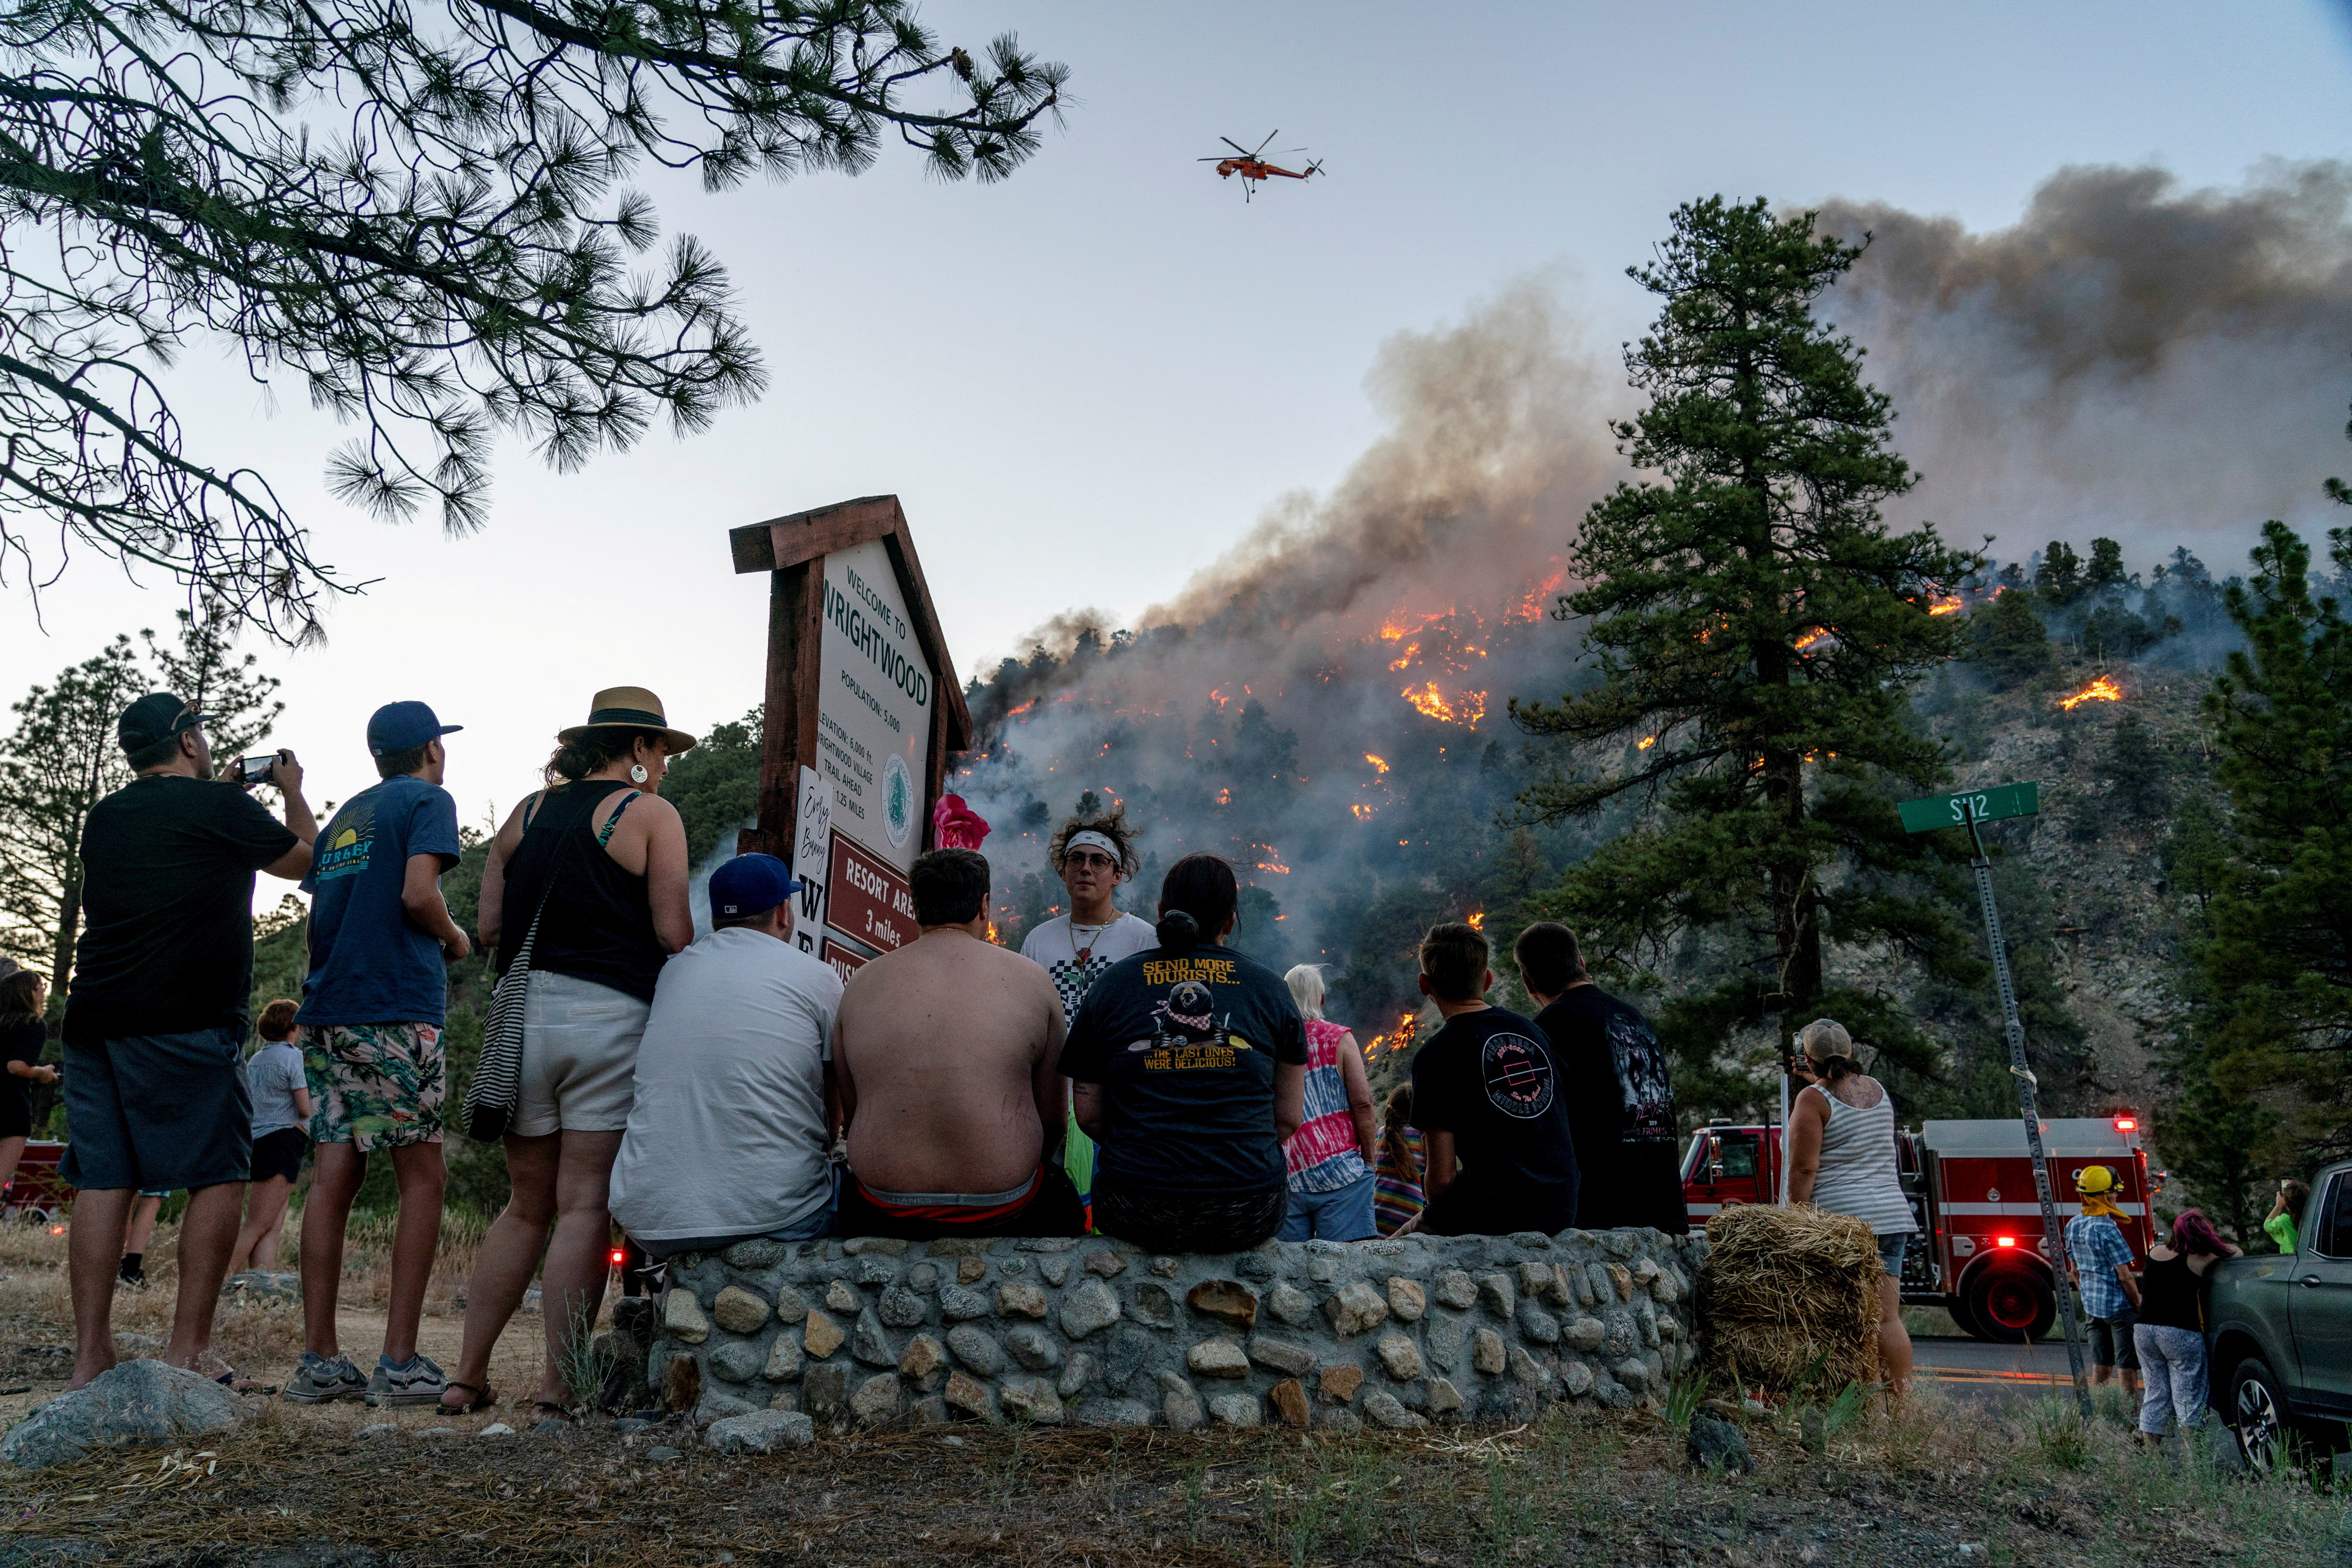 Residents watch part of the Sheep Fire wildfire burn through a hillside in Wrightwood